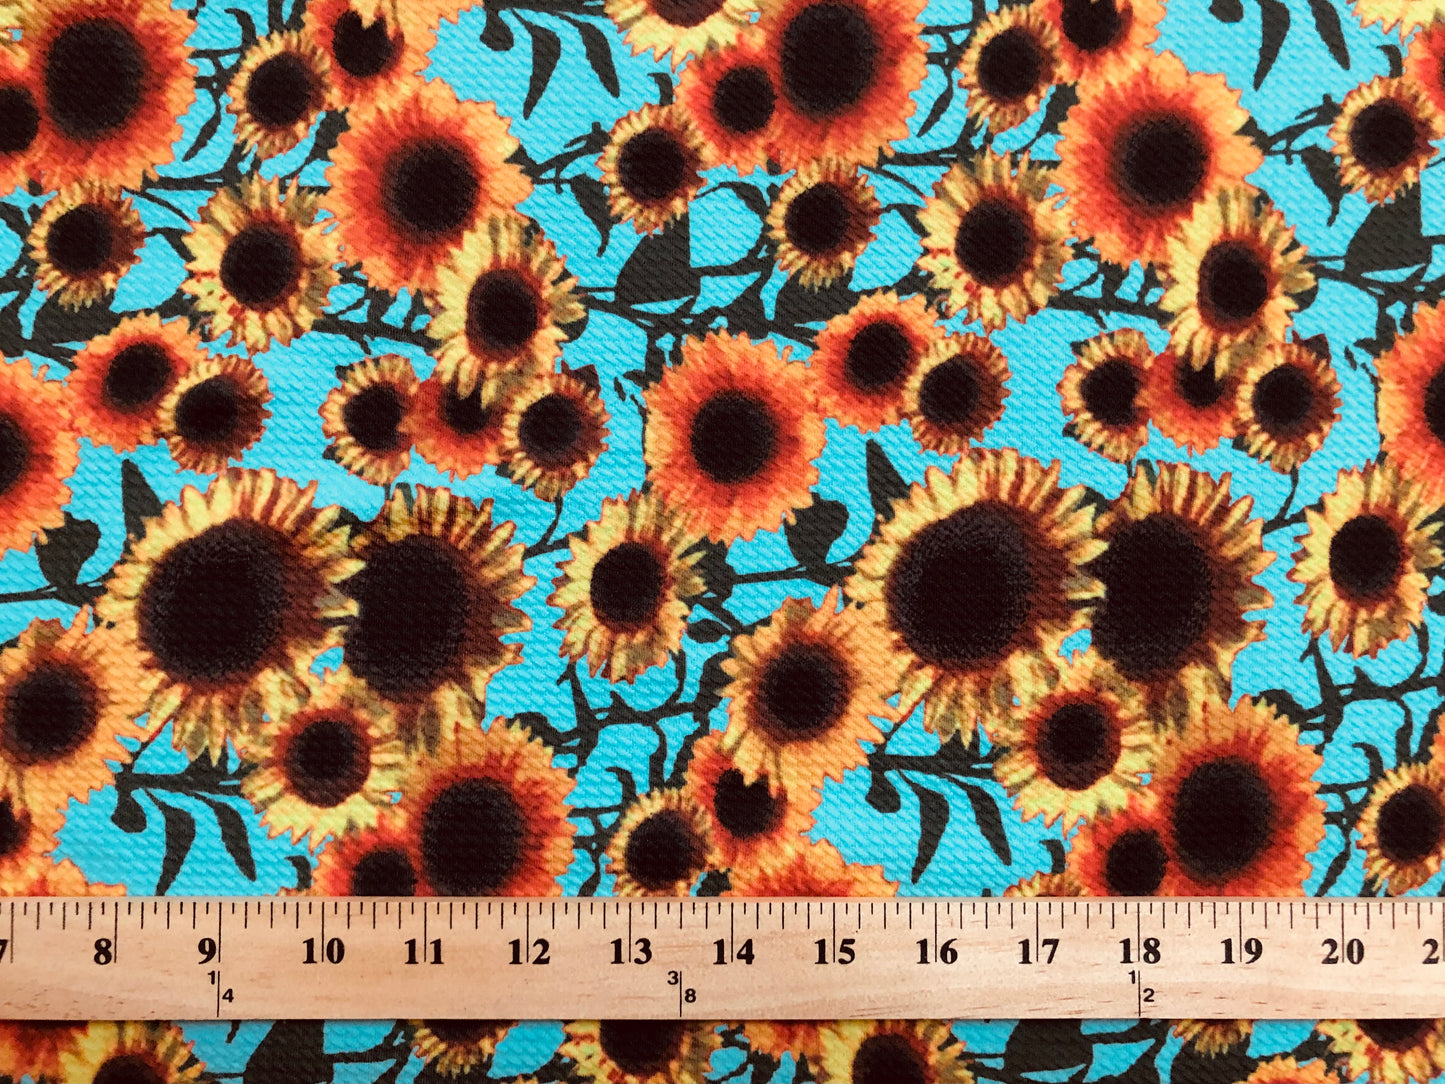 Bullet Knit Printed Fabric-Mint Orange Sunflowers-BPR212-Sold by the Yard